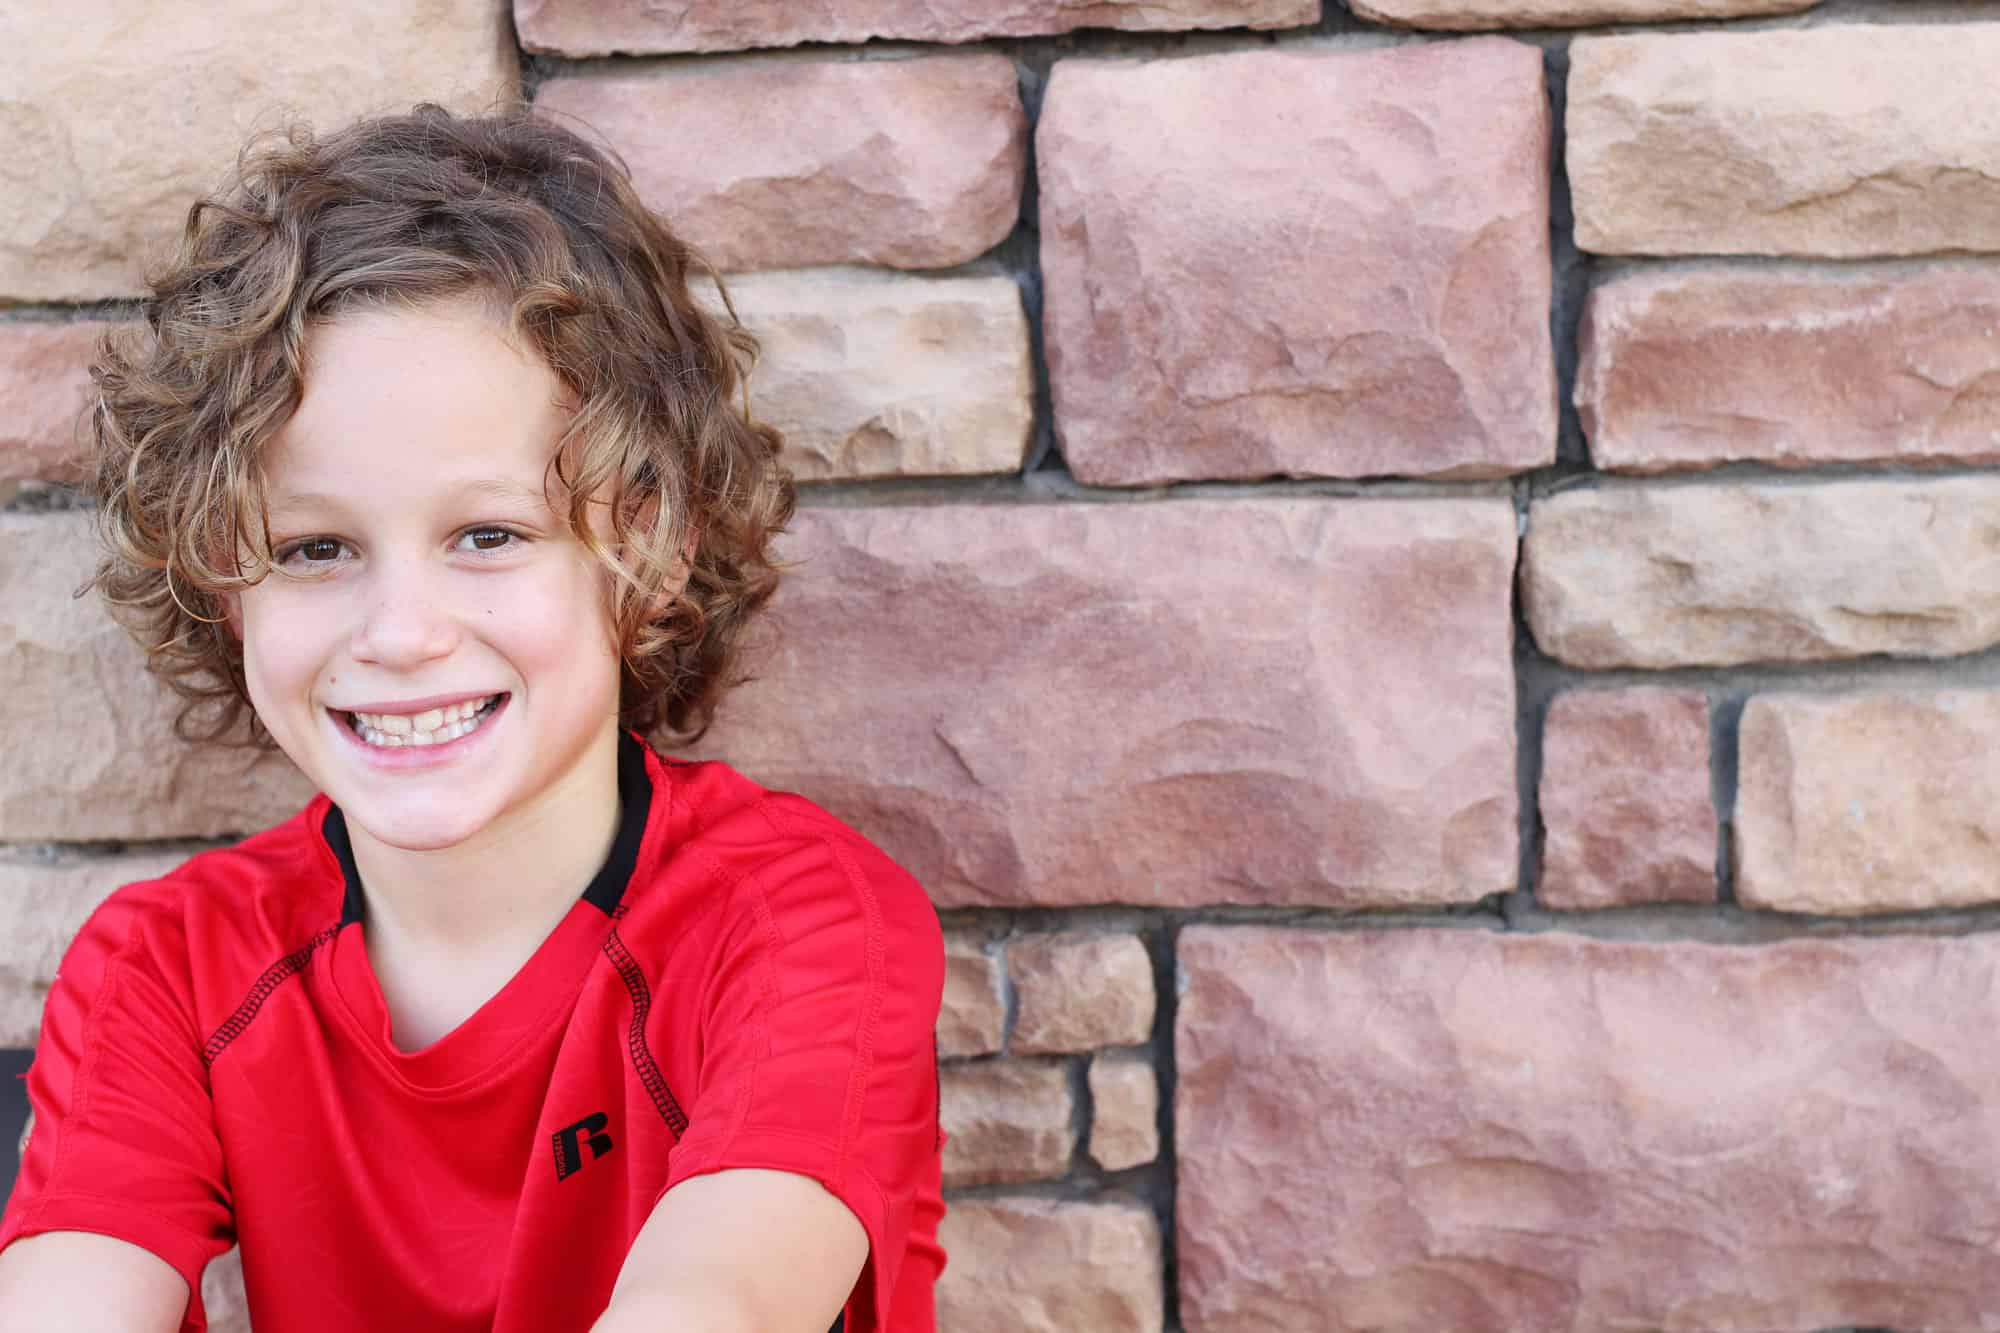 Boy in a red shirt sitting against a red brick wall.